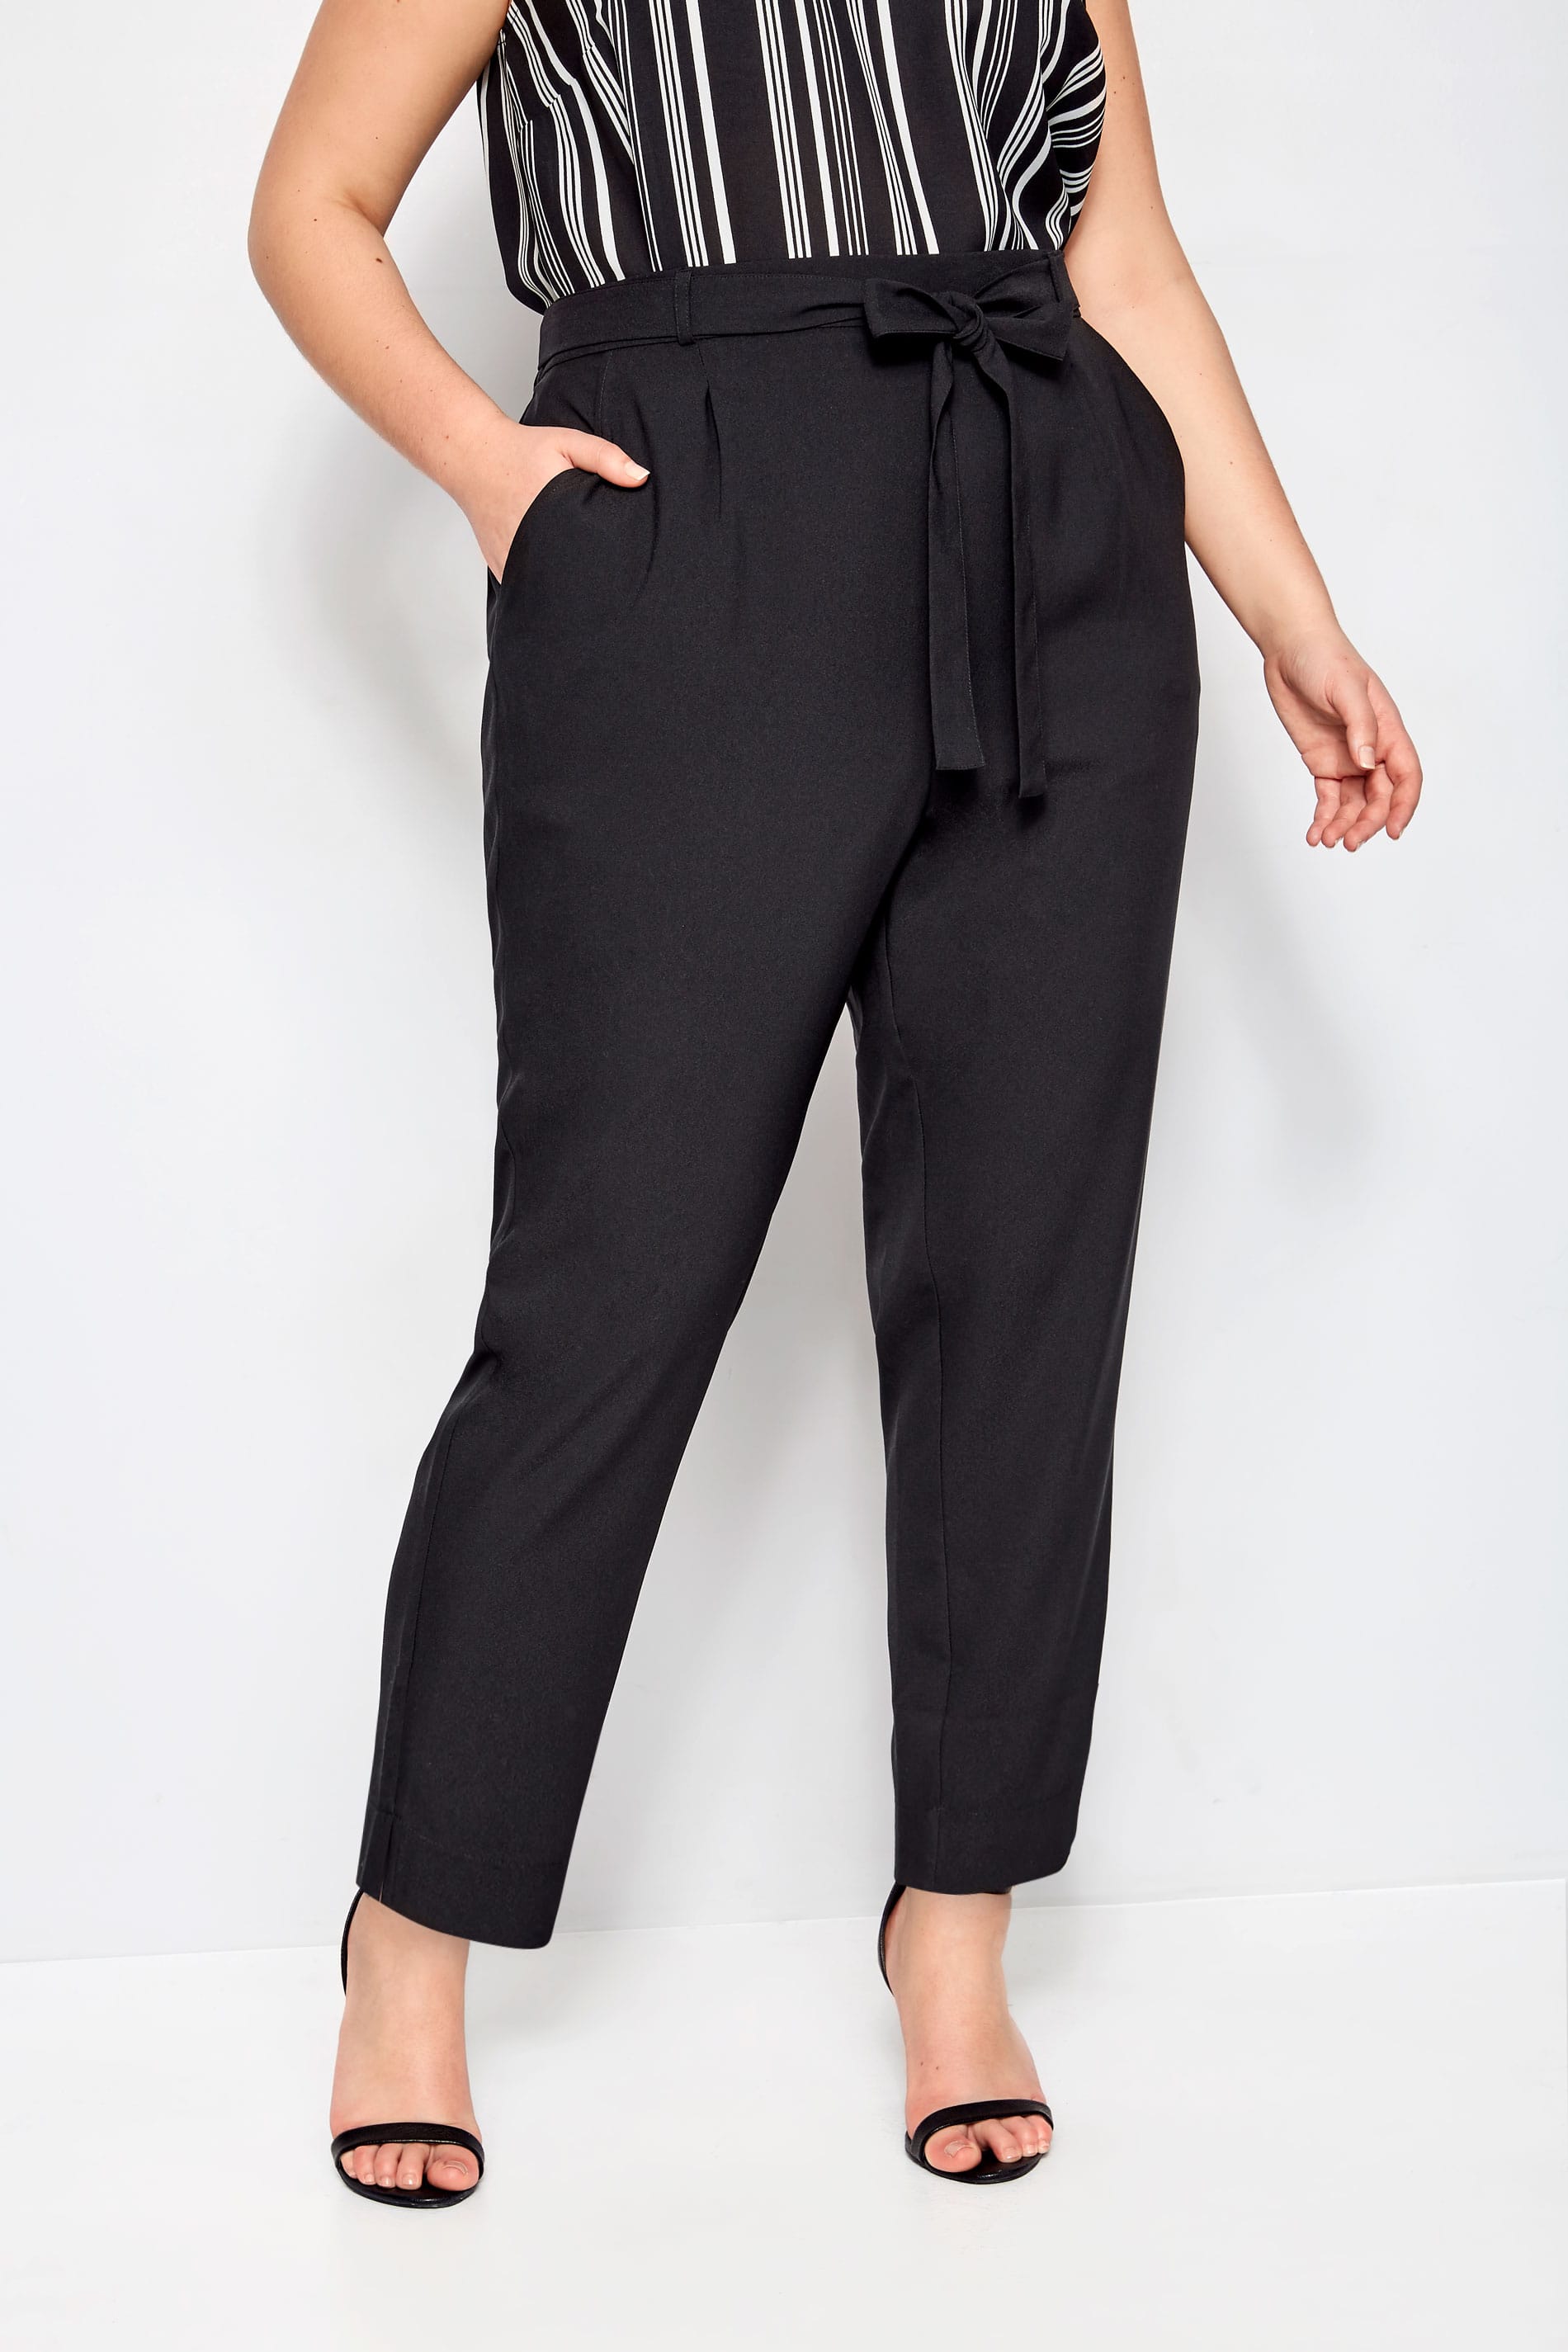 Plus Size Black Crepe Tapered Trousers | Sizes 16 to 36 | Yours Clothing